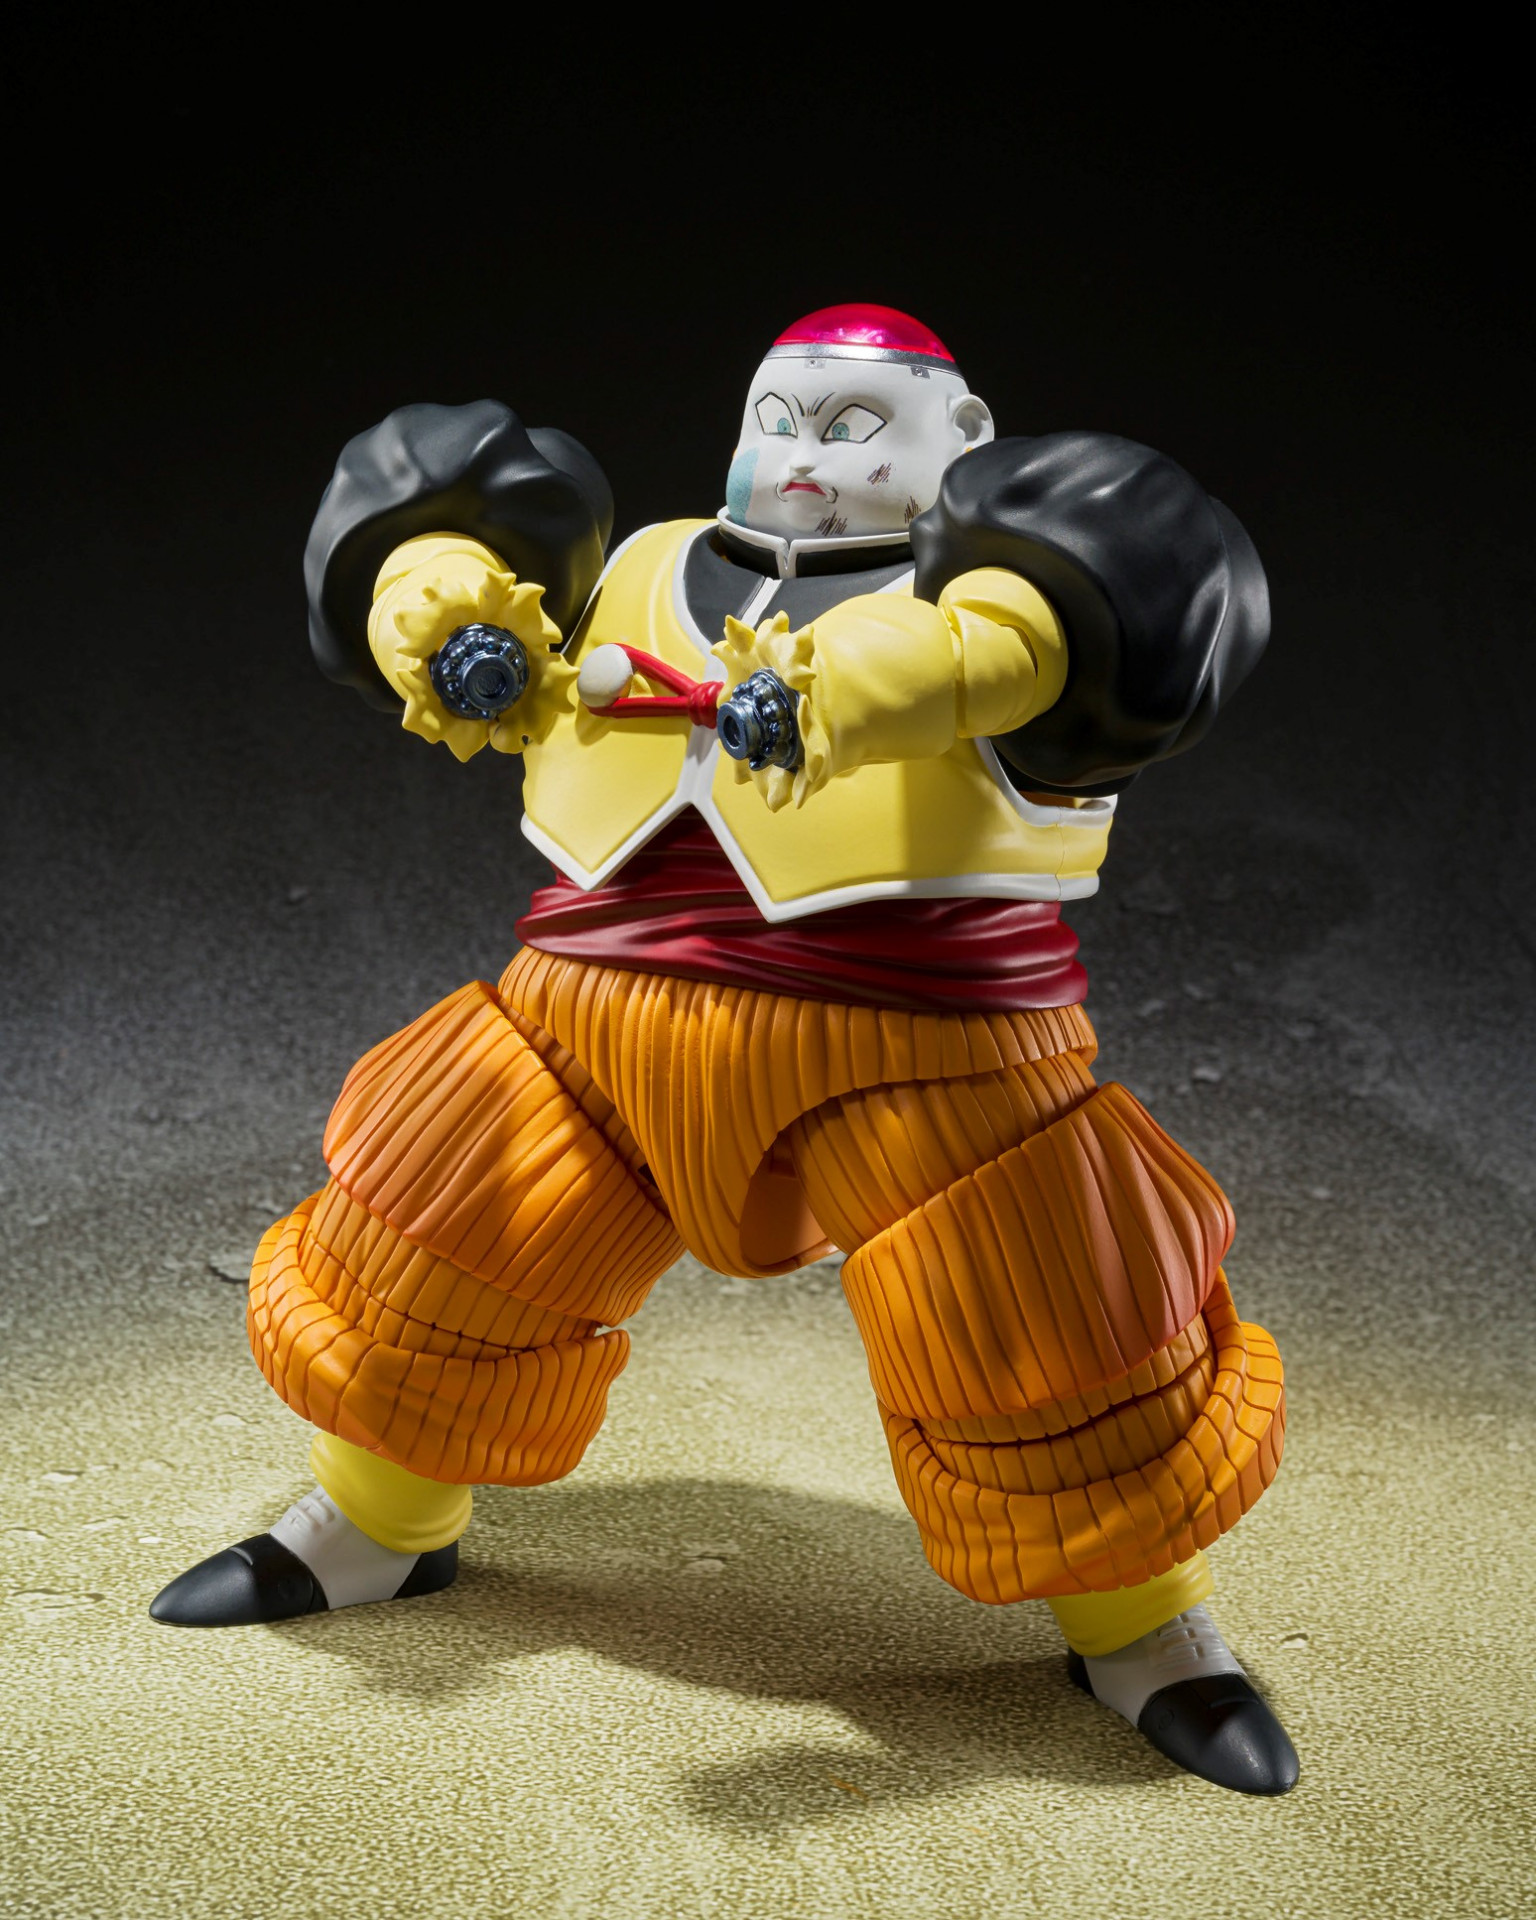 Android 20 Figure Announced for S.H.Figuarts!]